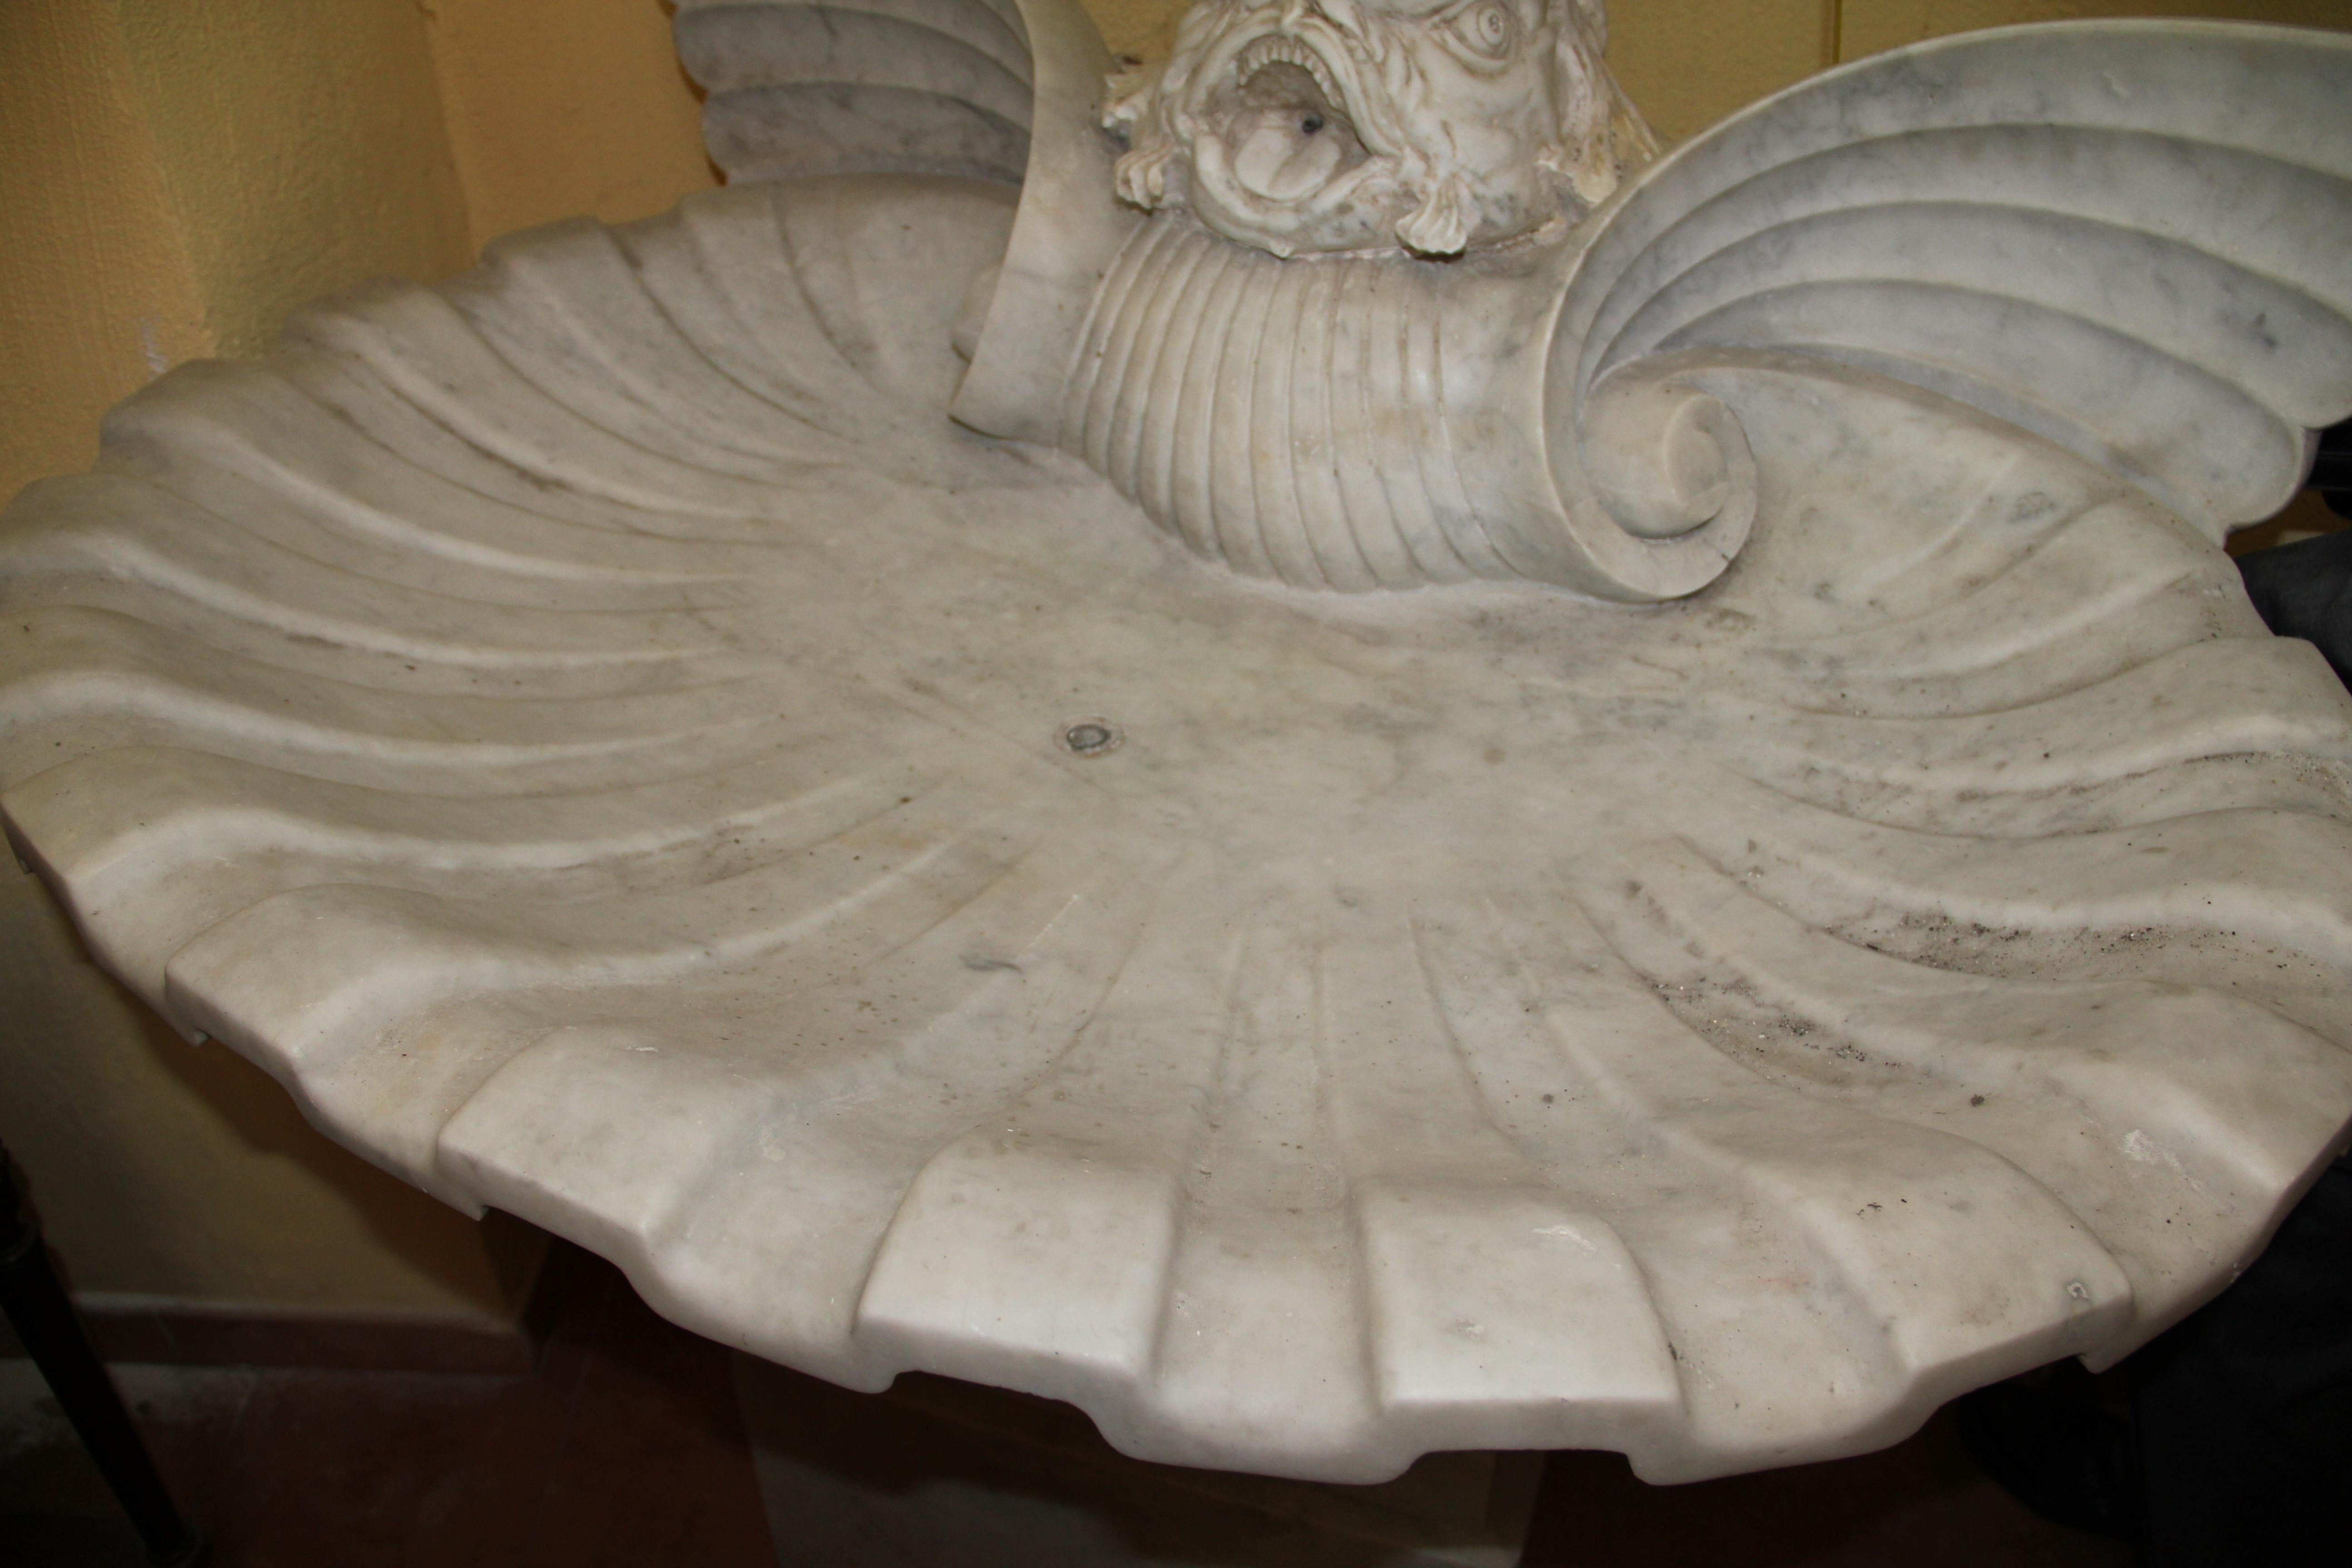 Carved of white marble, a stylised triton serving as spout, above a large scalloped sea shell, supported on organic, foliate scrolls.